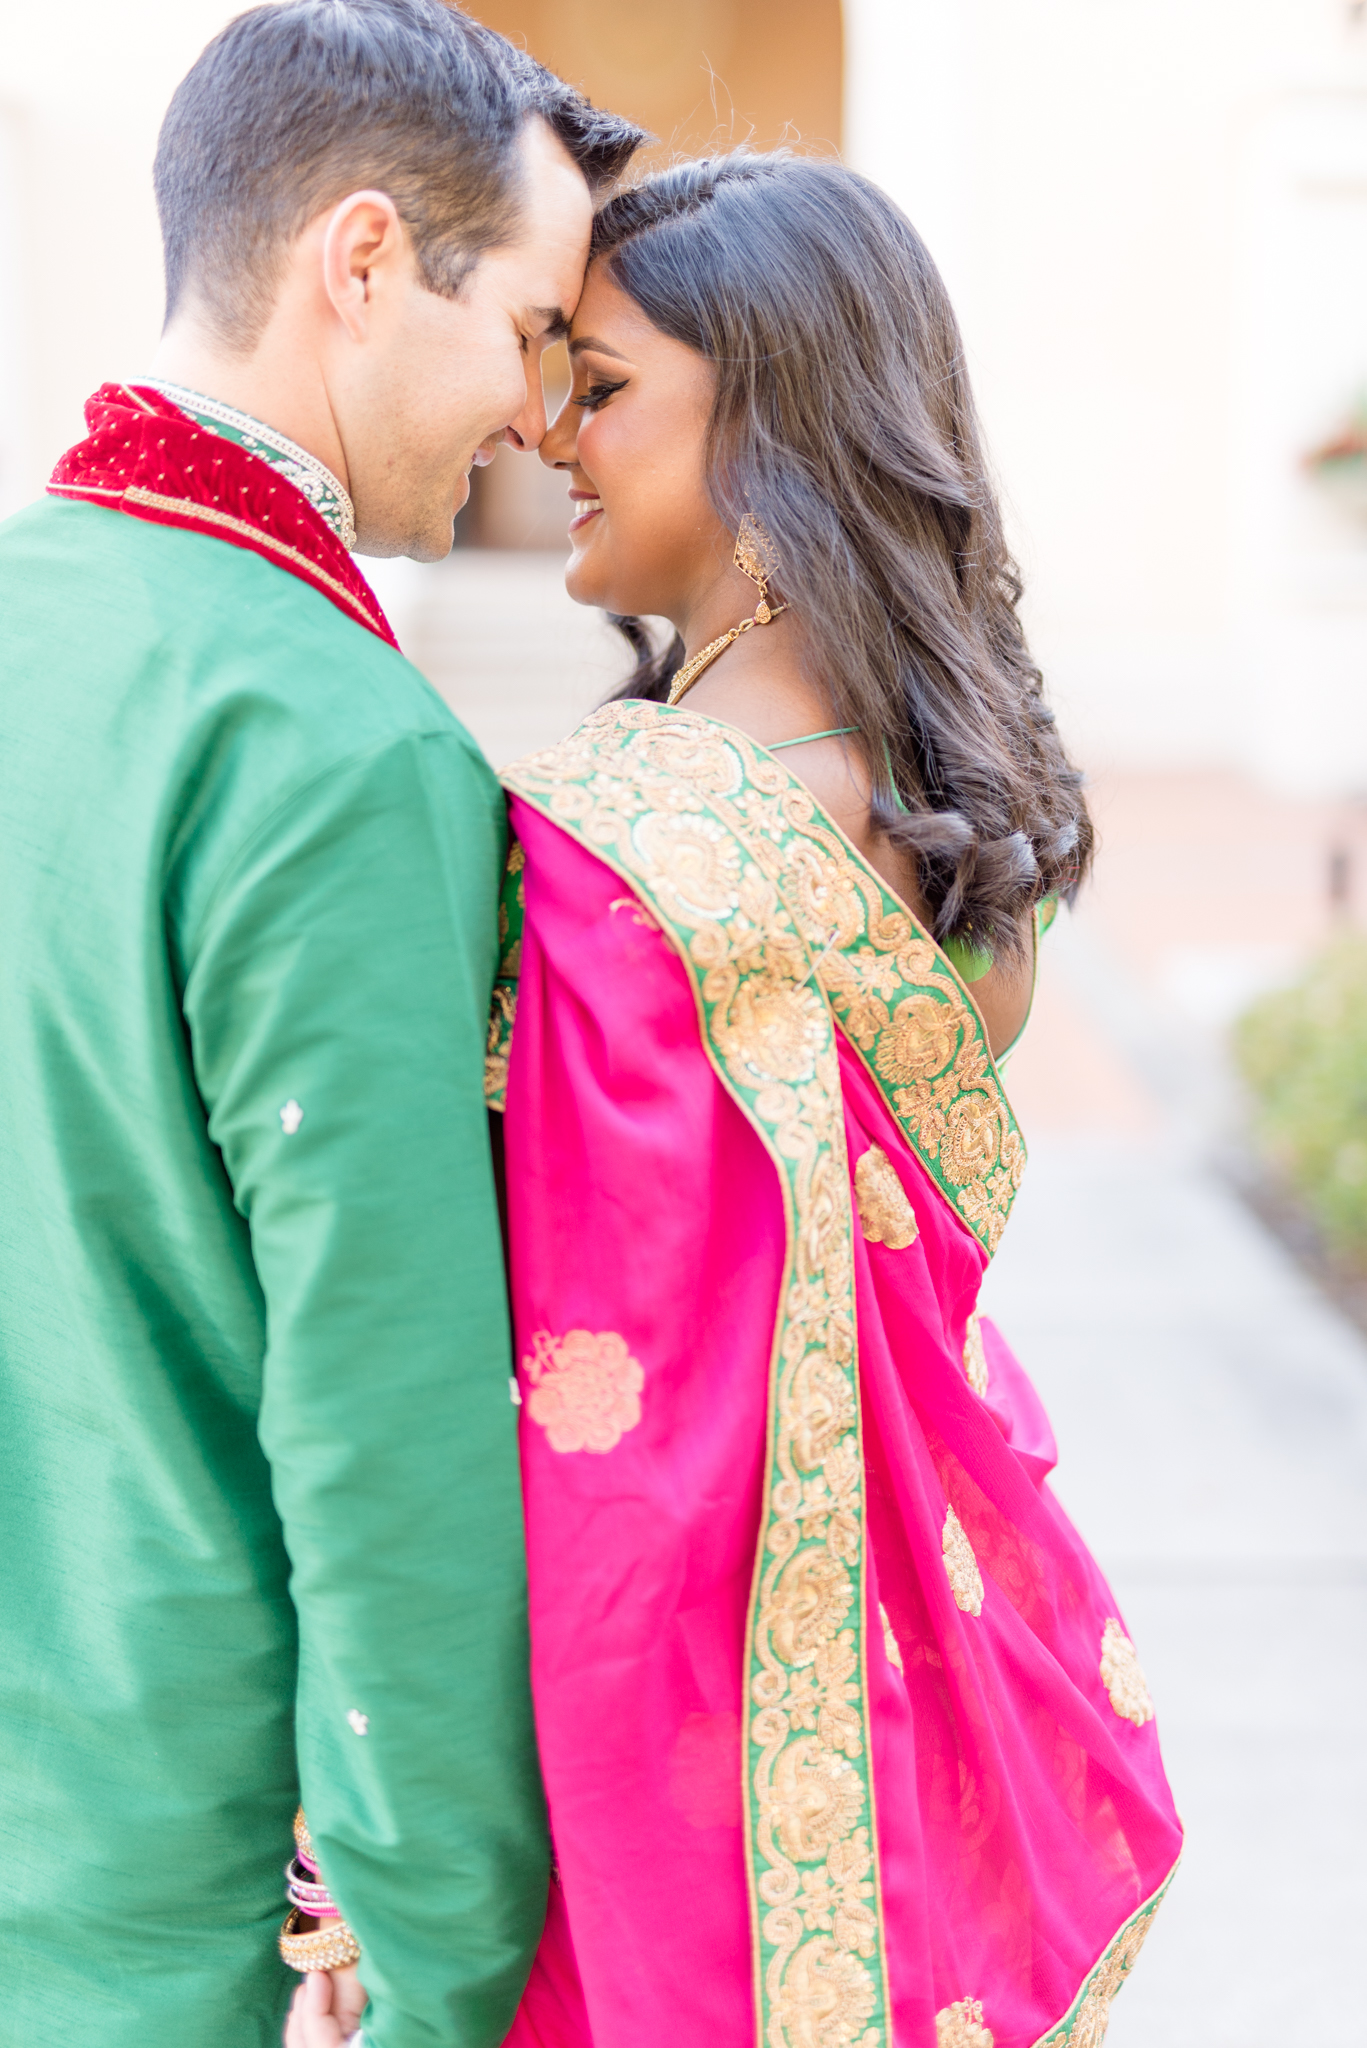 Man and woman smile in traditional Indian outfits.